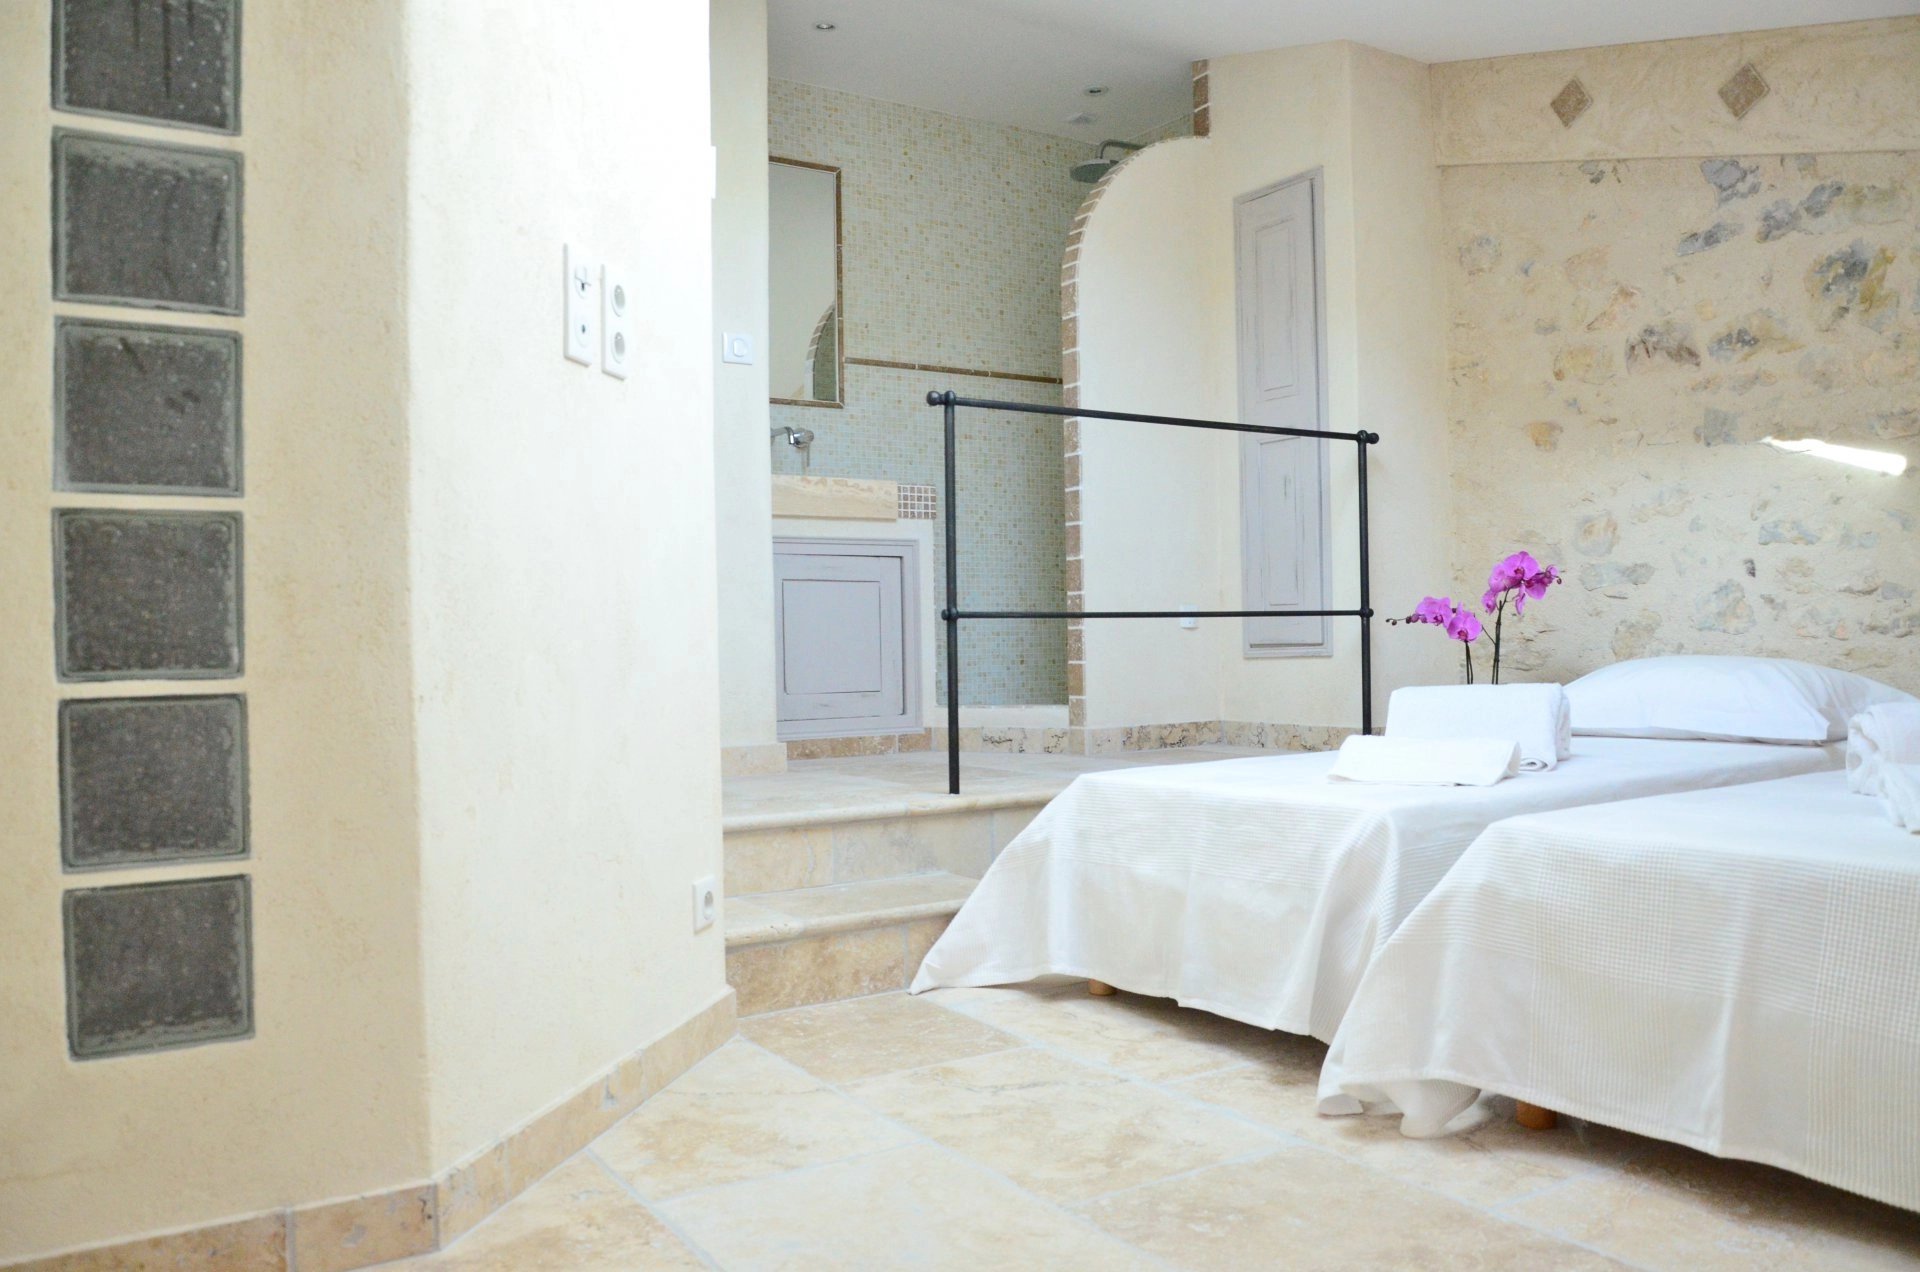 TWO BEDROOMS'APARTMENT IN THE VILLAGE CENTER OF VALBONNE